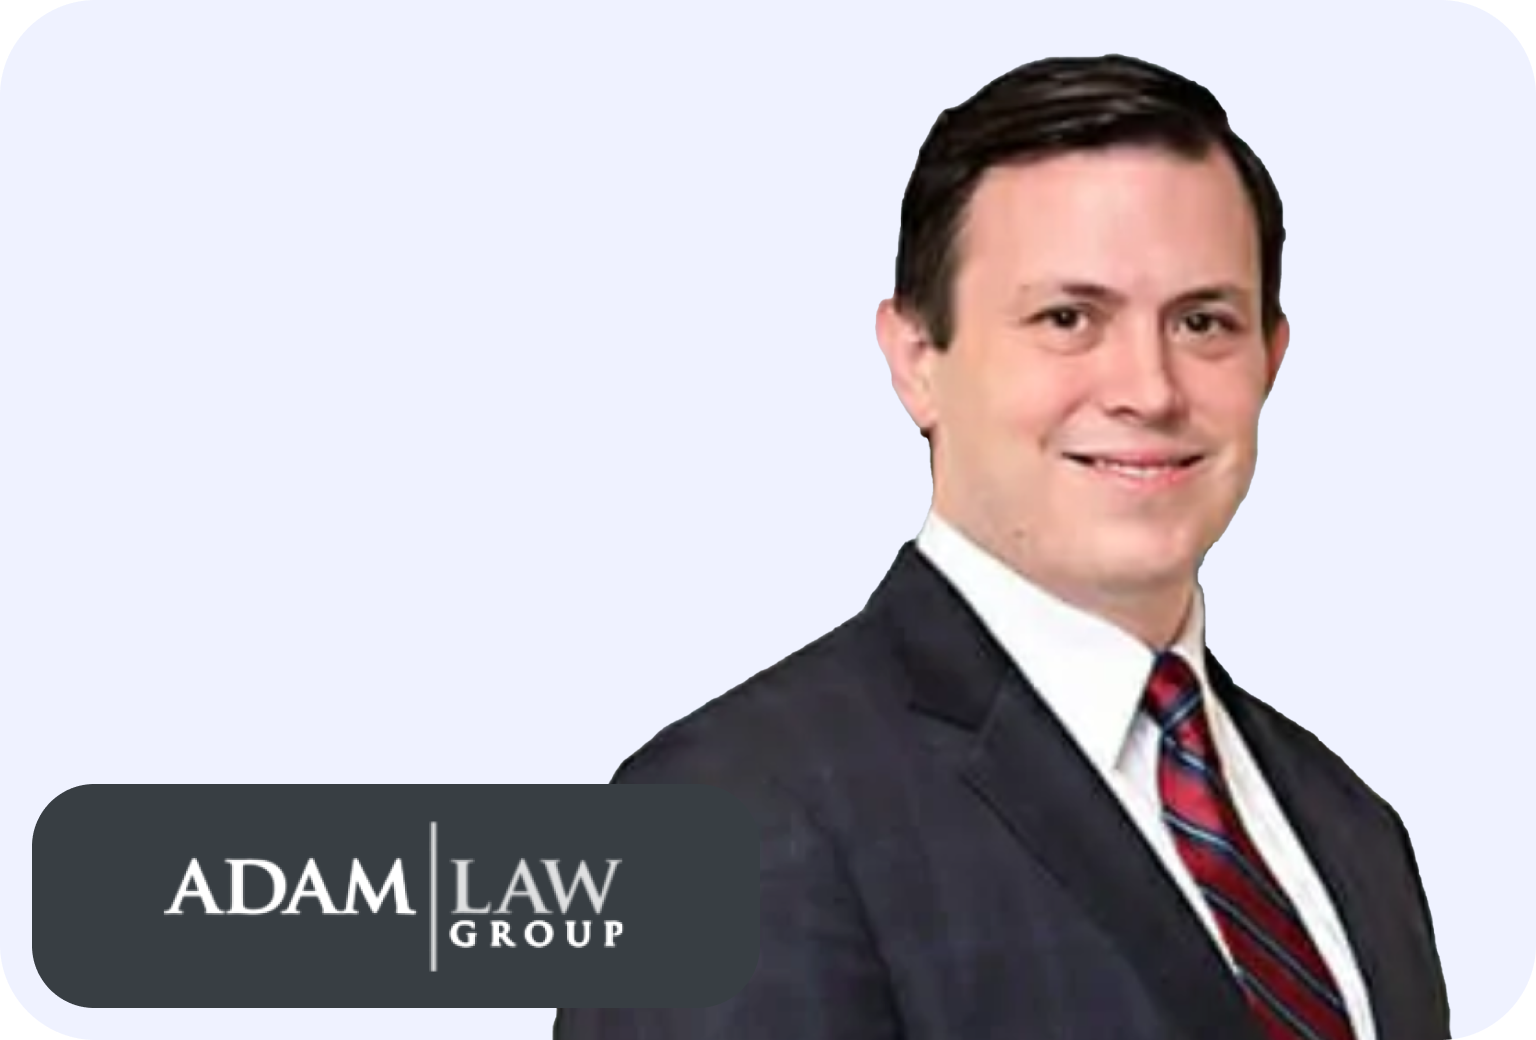 Adam Law Group: Streamlining Accounts Receivable and Driving Growth with Kolleno